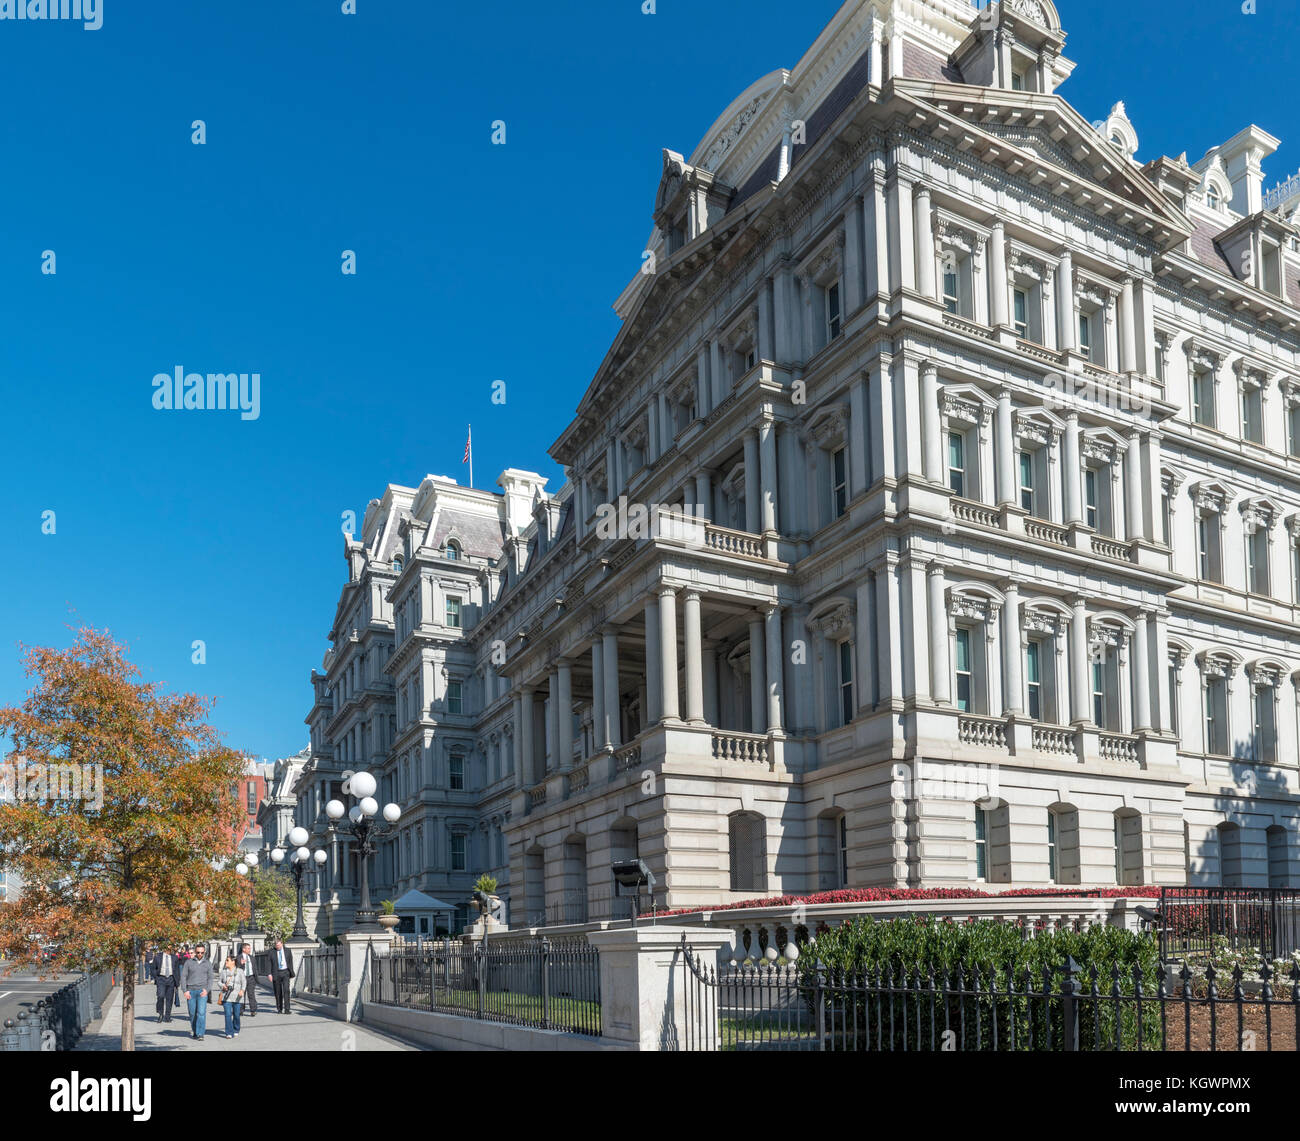 Eisenhower Executive Office Building, 17th Street NW, Washington DC, USA Banque D'Images